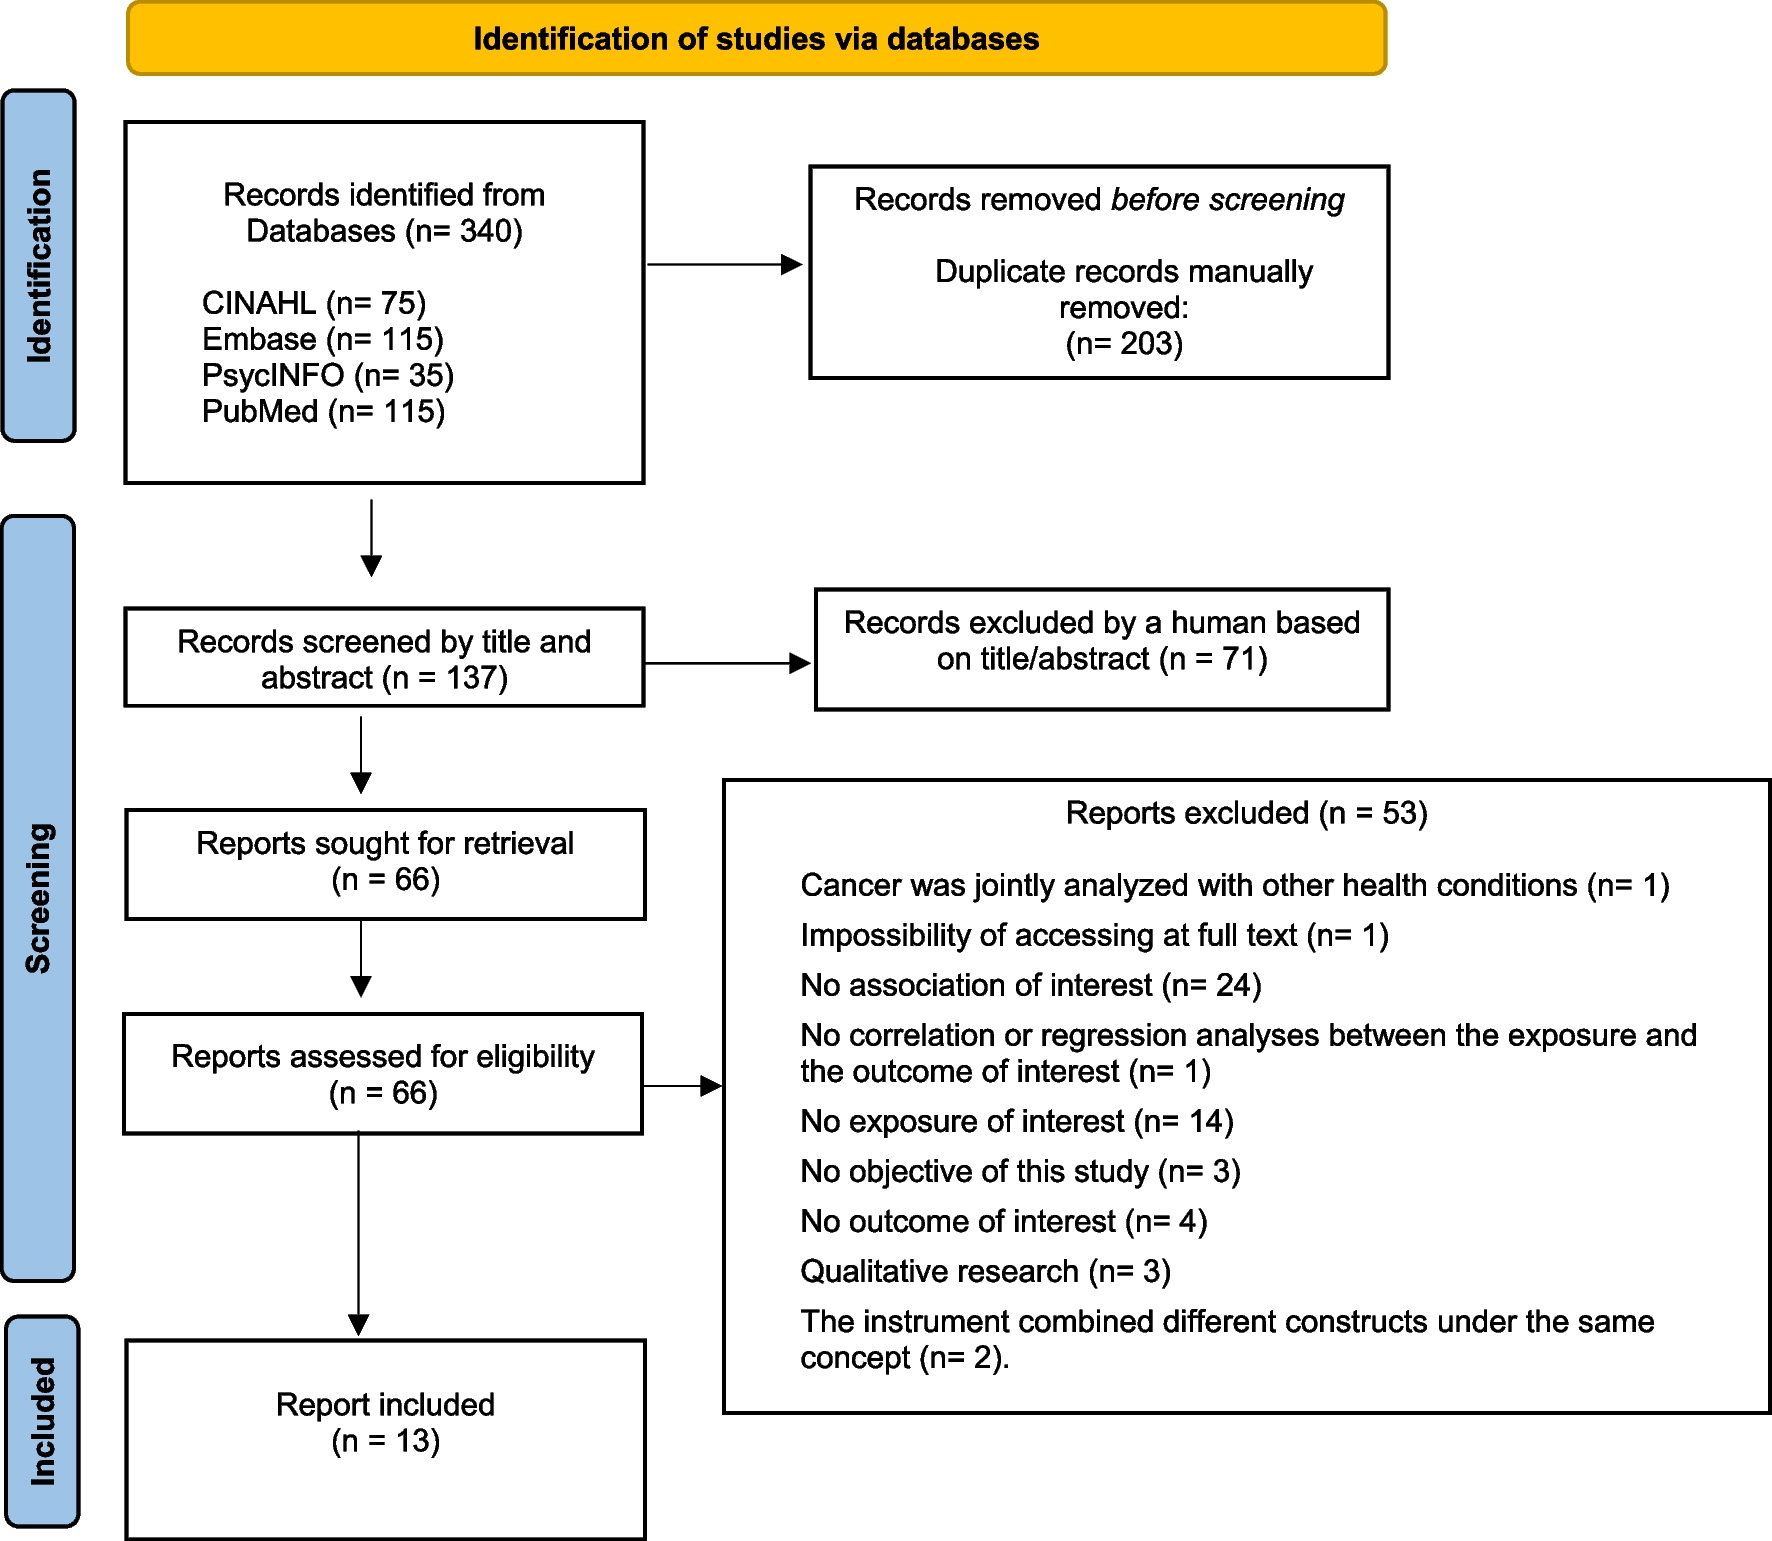 Spiritual well-being, faith, meaning in life, peace, and purpose in life for cancer-related fatigue: systematic review with meta-analysis and meta-regressions